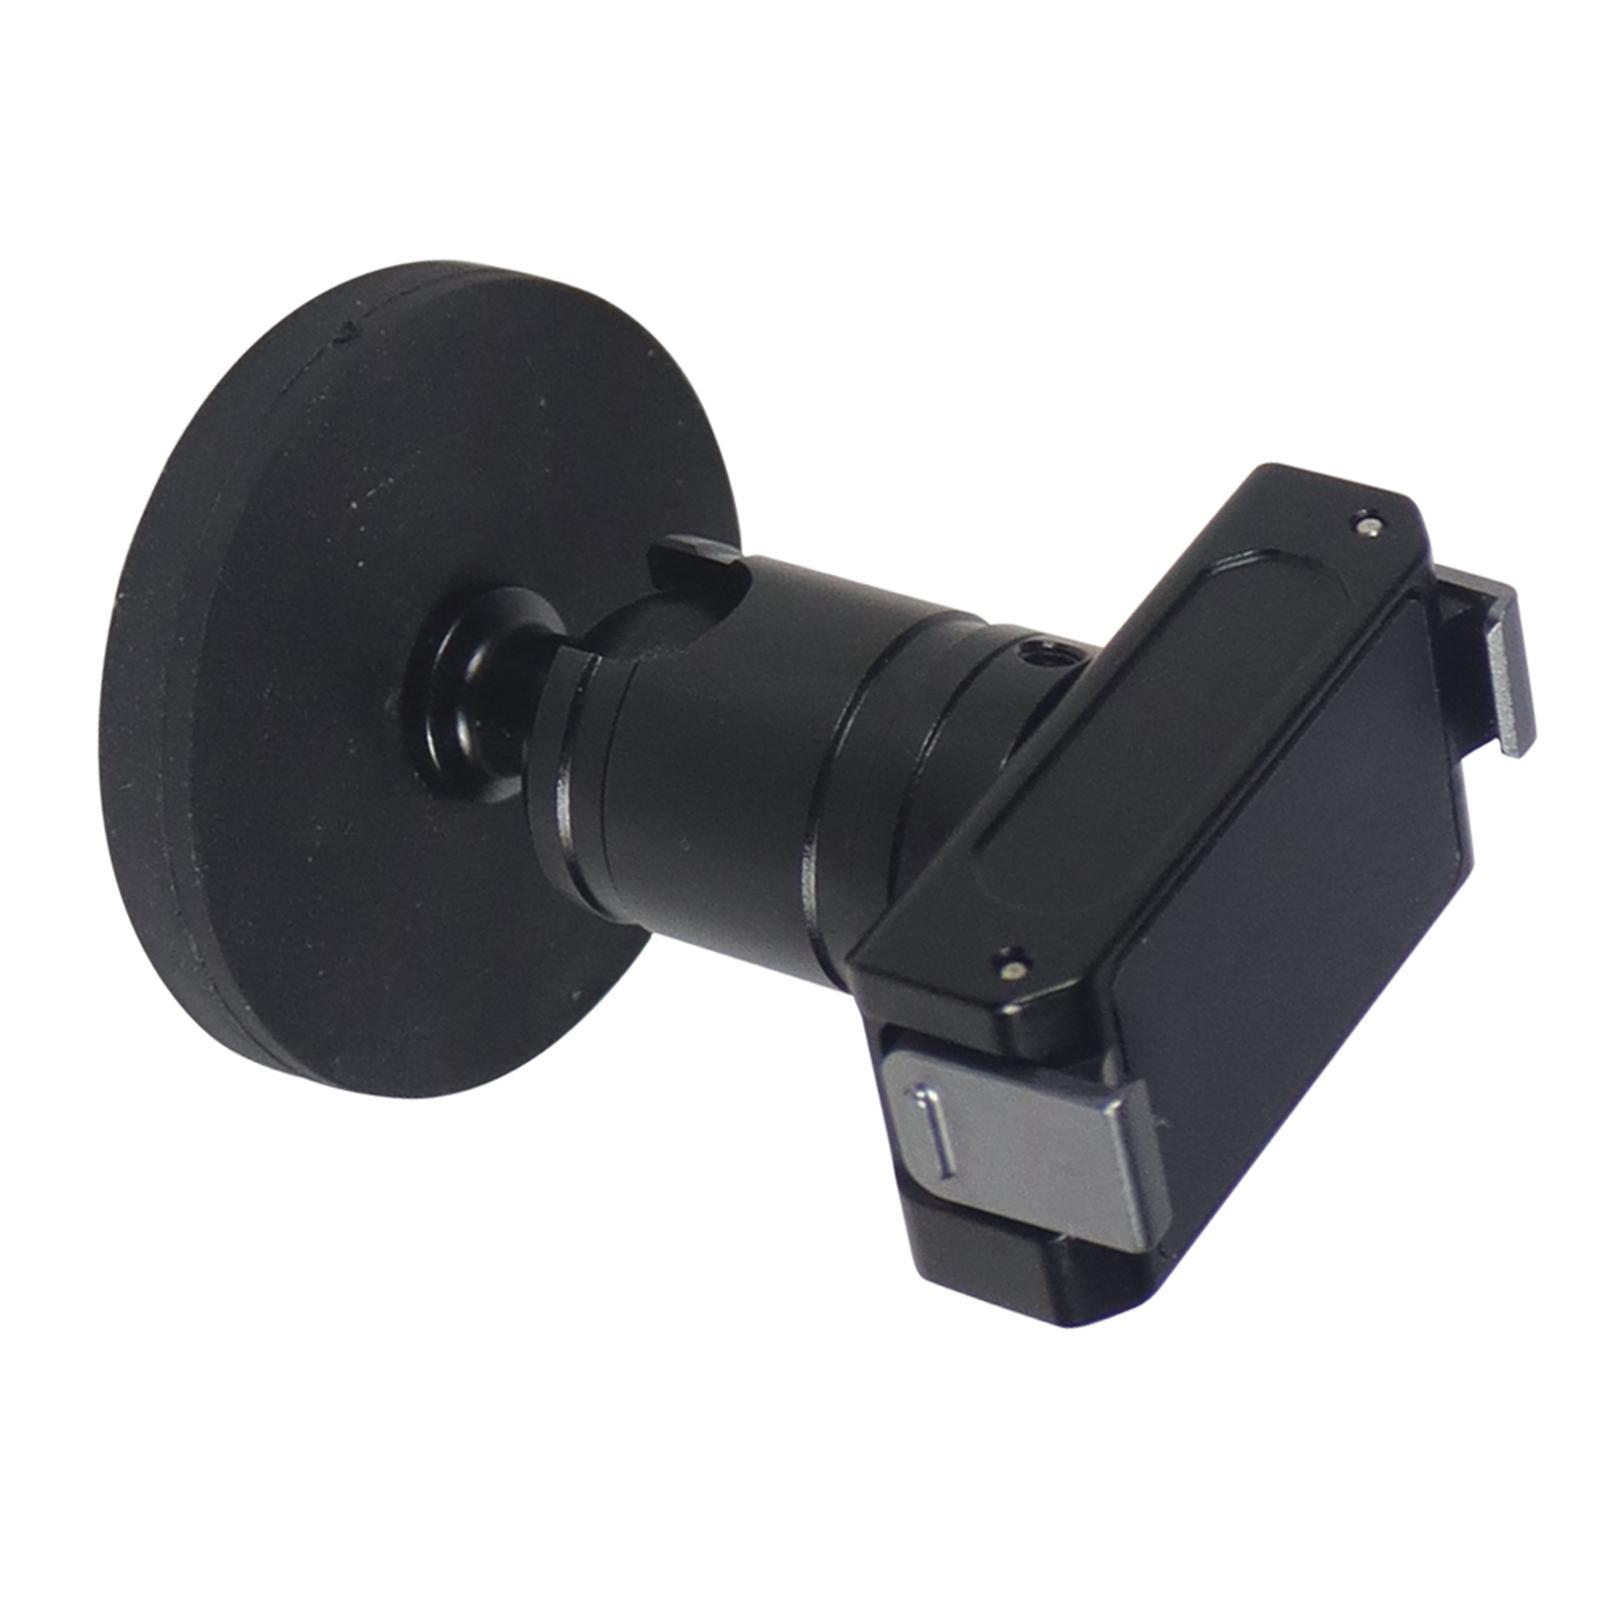 Camera Mount 360 Degree Rotation for  2 Accessories